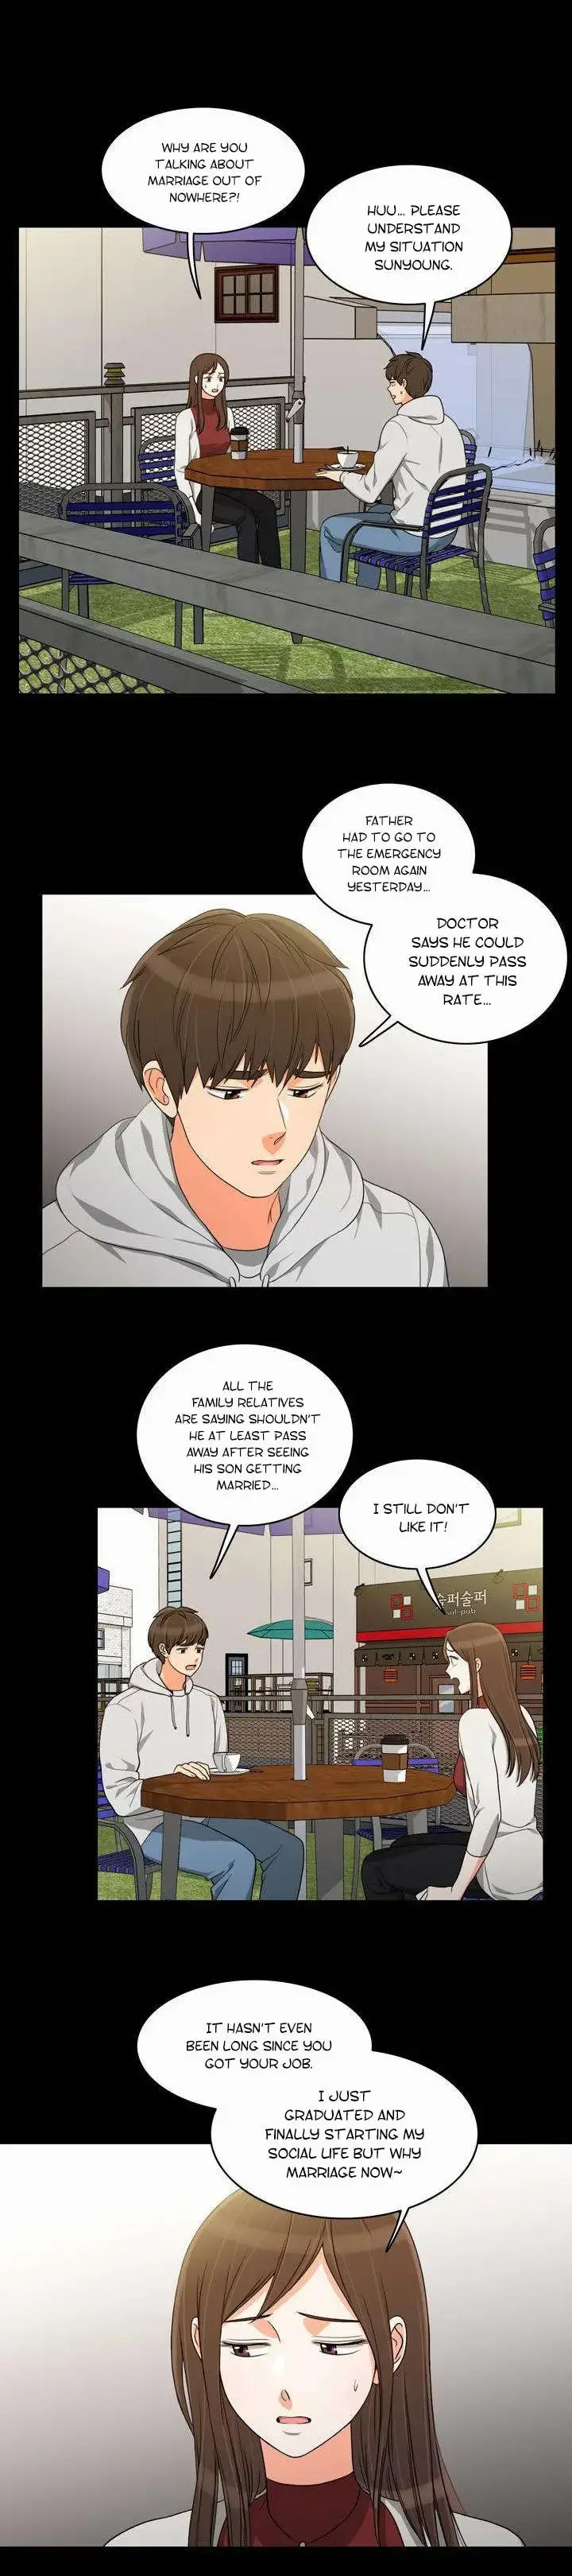 do-it-one-more-time-chap-39-11